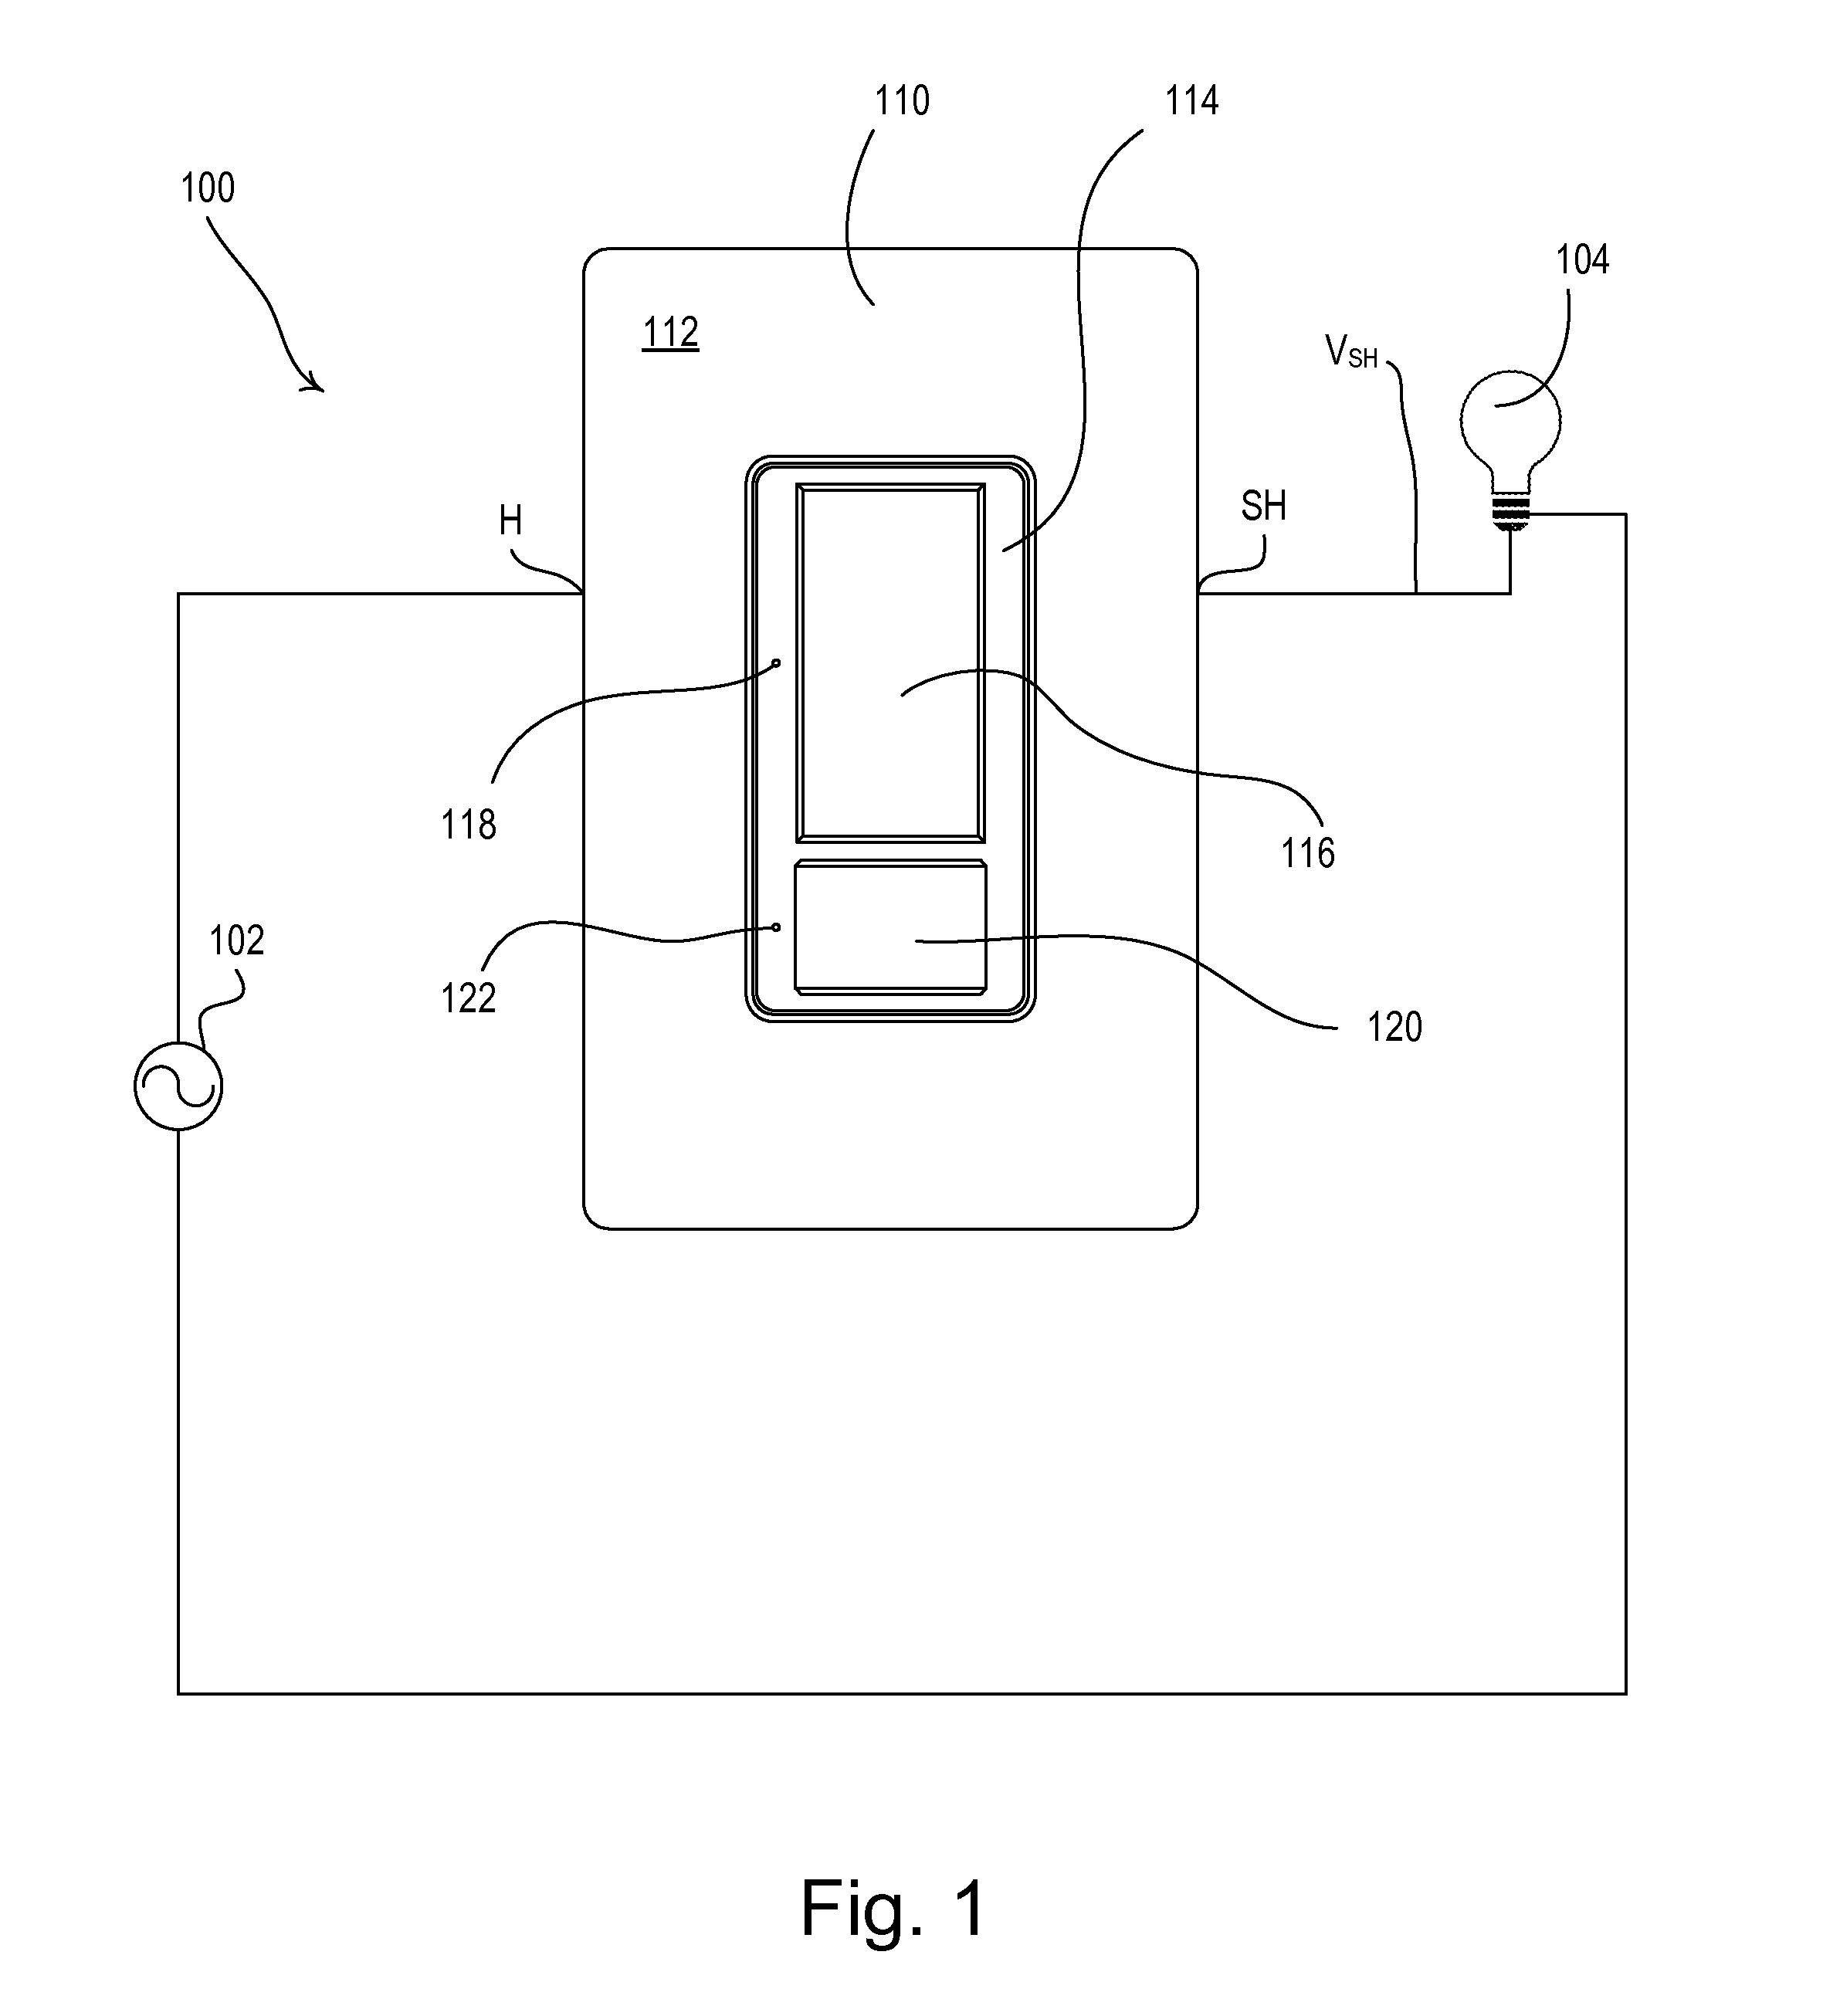 Power Supply For A Load Control Device